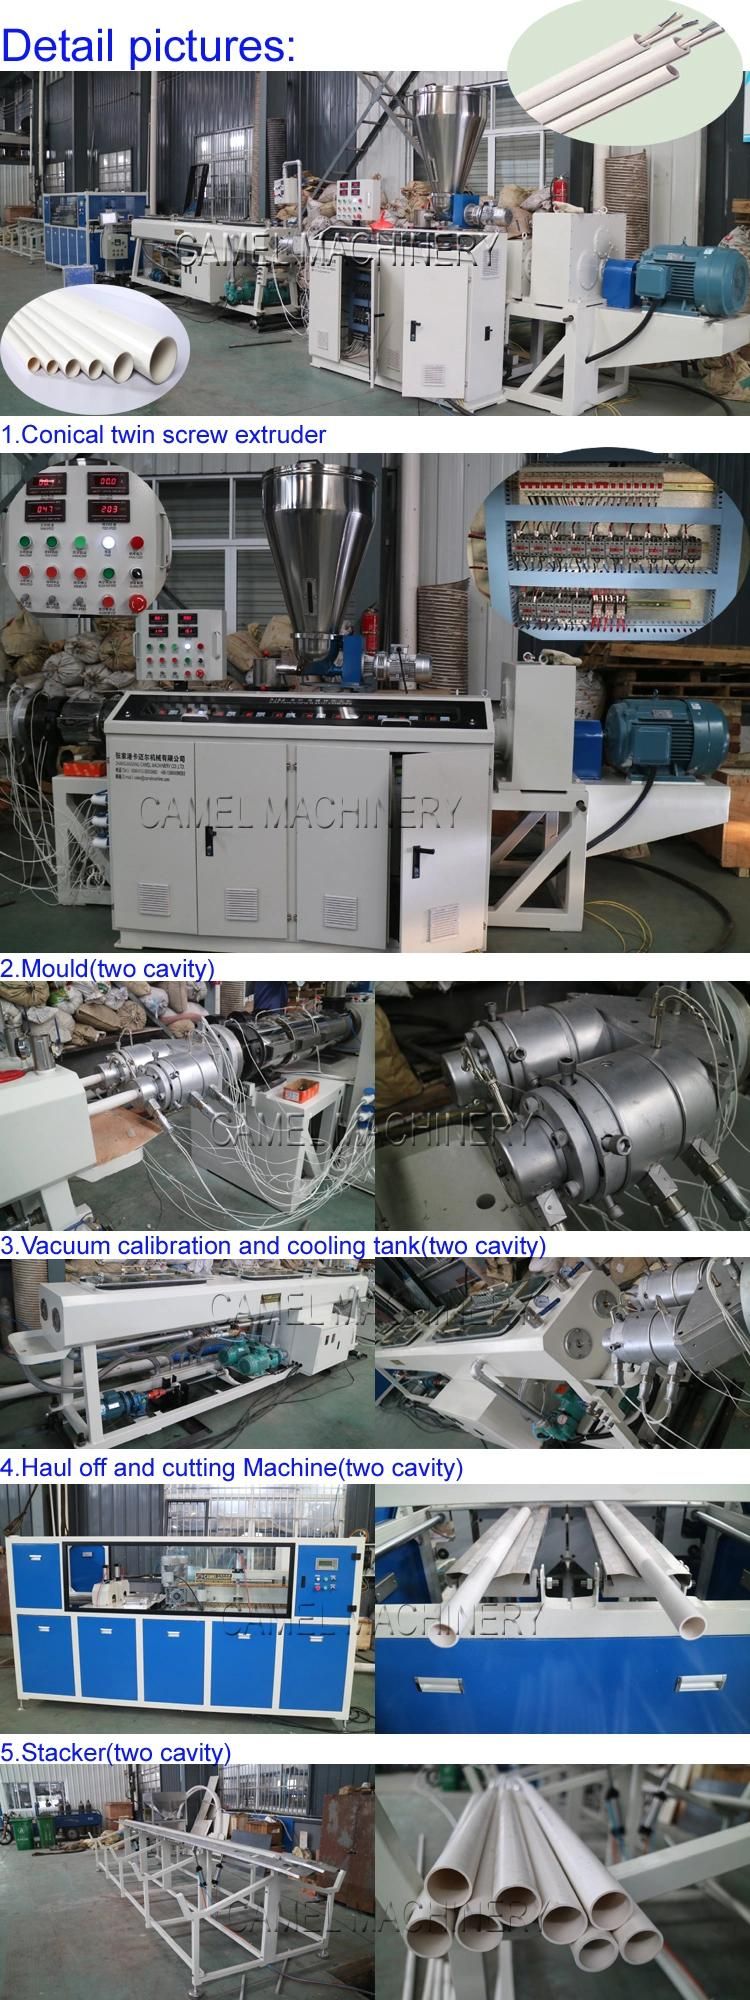 Plastic Double Pipe PVC/PE (HDPE LDPE) /PPR Electricity Conduit Tube/ Water Sewage Pressure Pipe Extrusion Extruding Production Line Making Machine